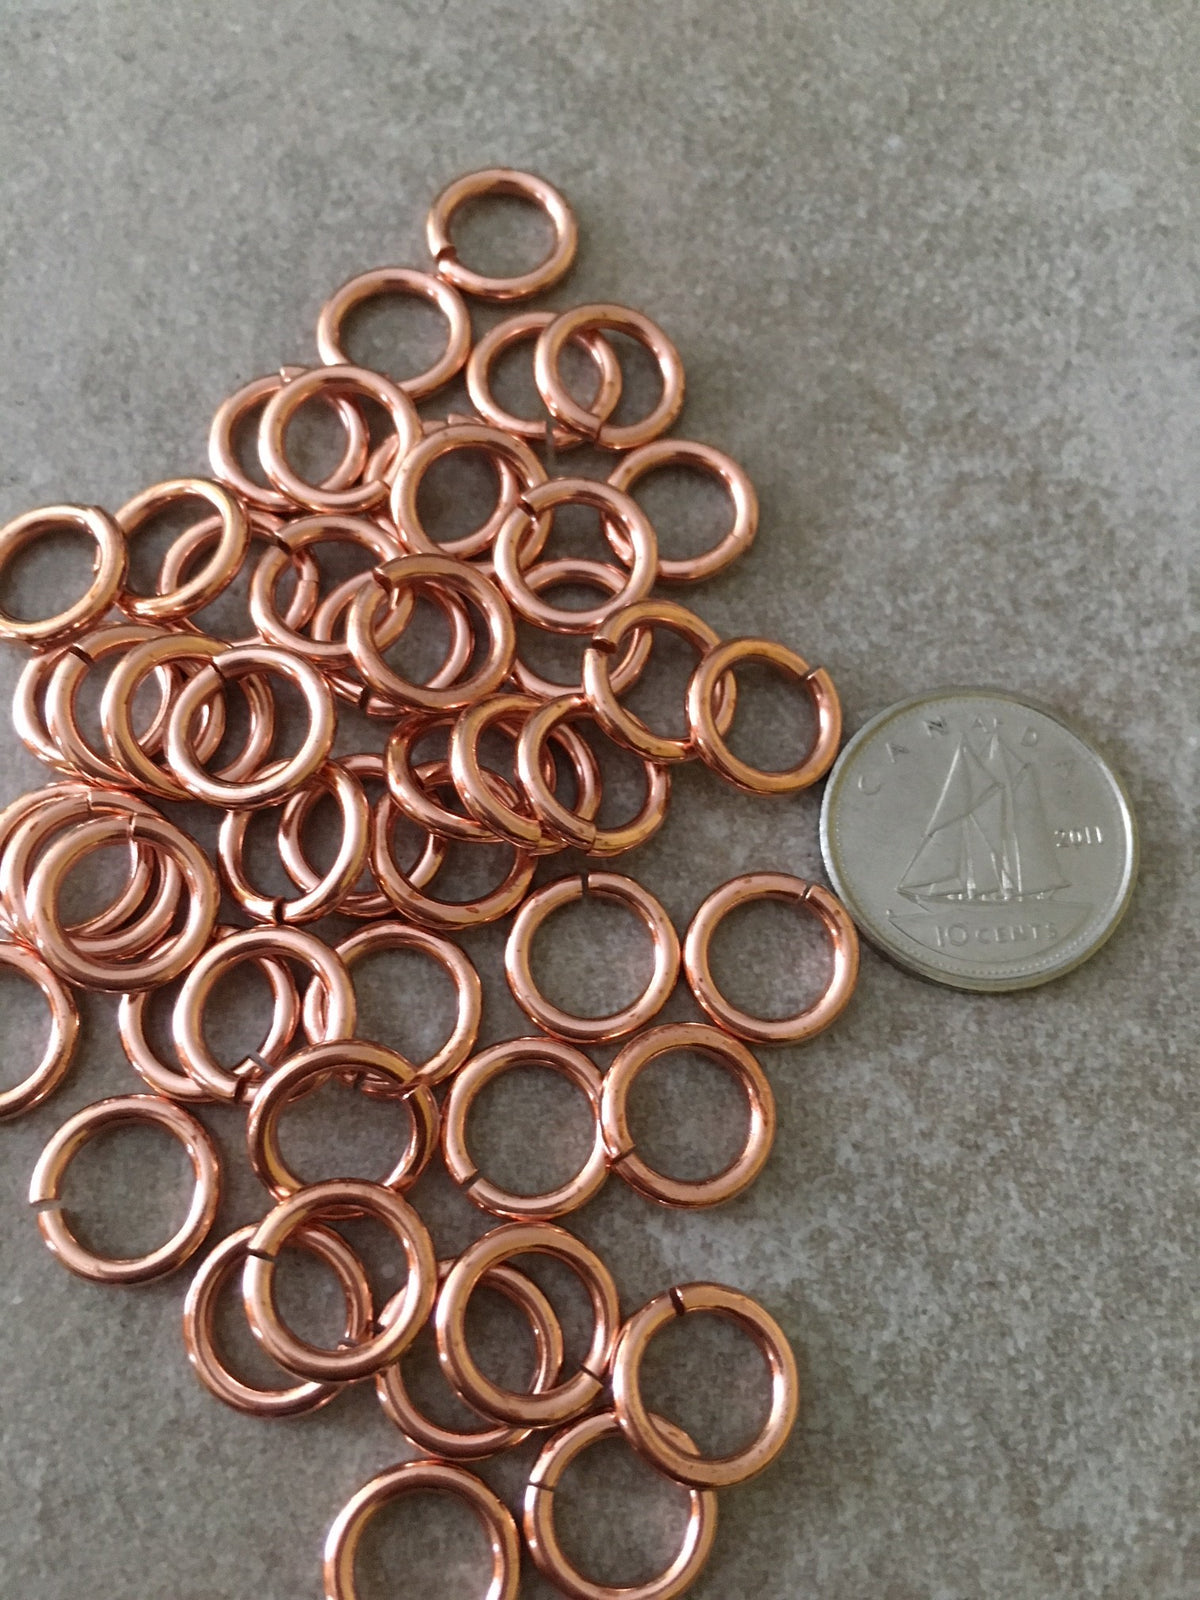 4.5mm/20g Oval Jump Rings- Antique Copper 